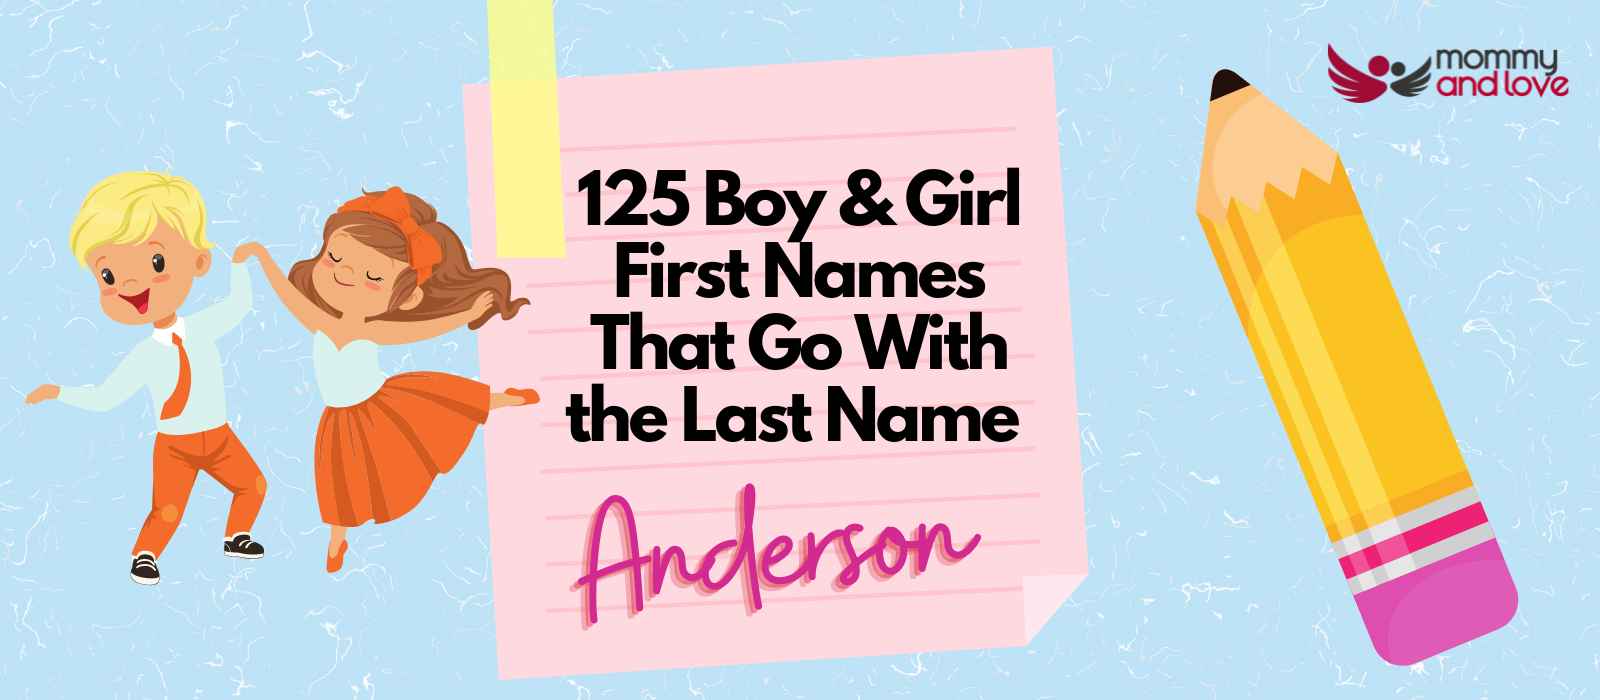 125 Boy & Girl First Names That Go With the Last Name Anderson